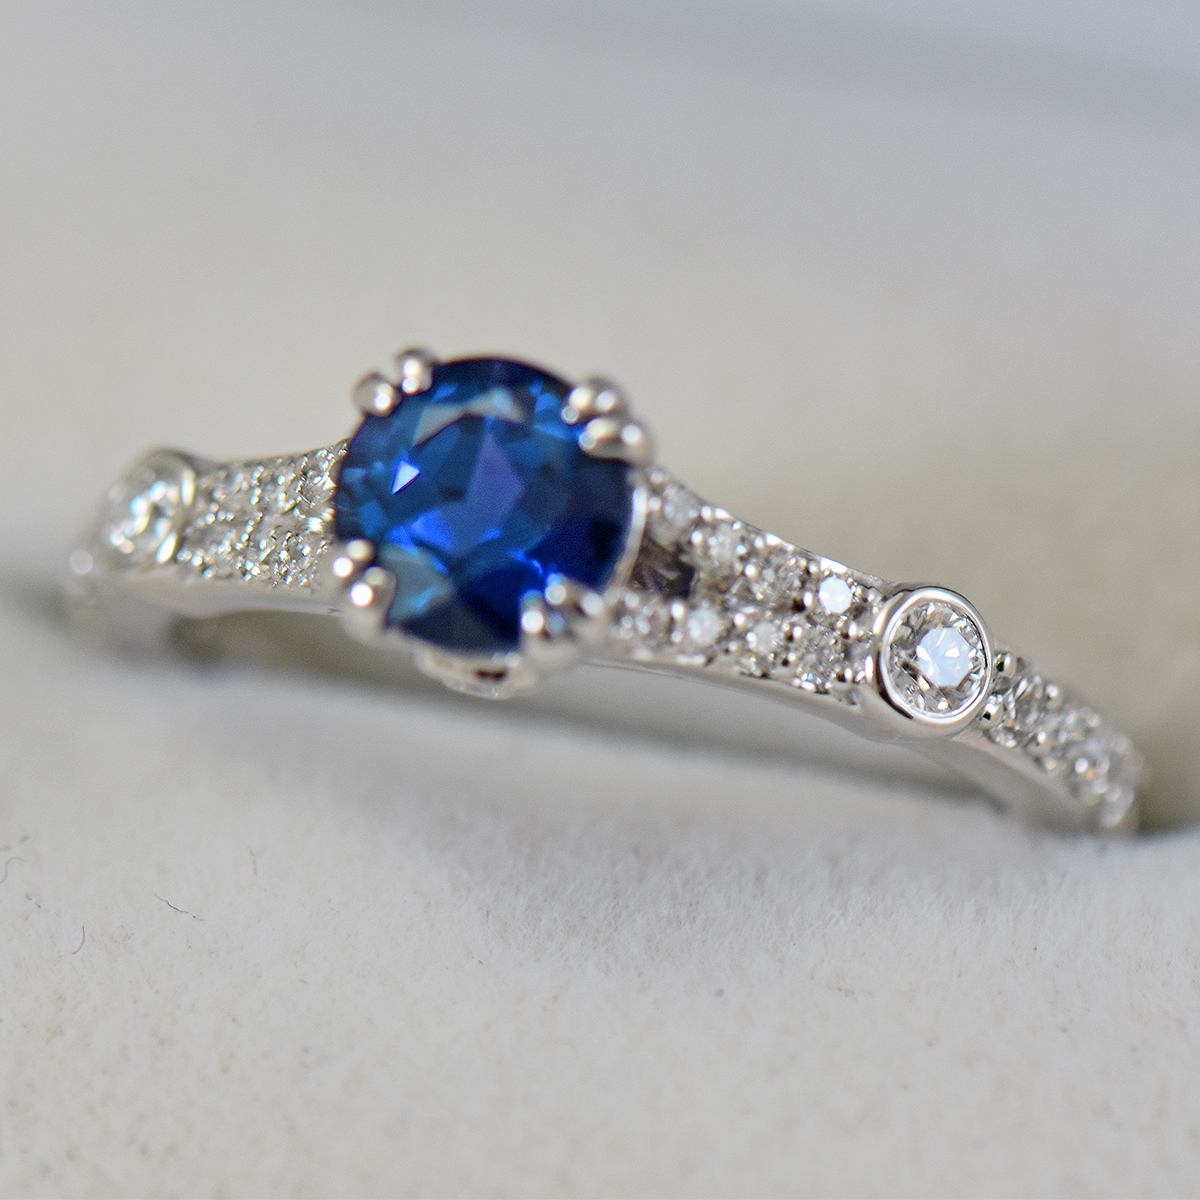 100 year old engagement ring : r/jewelry